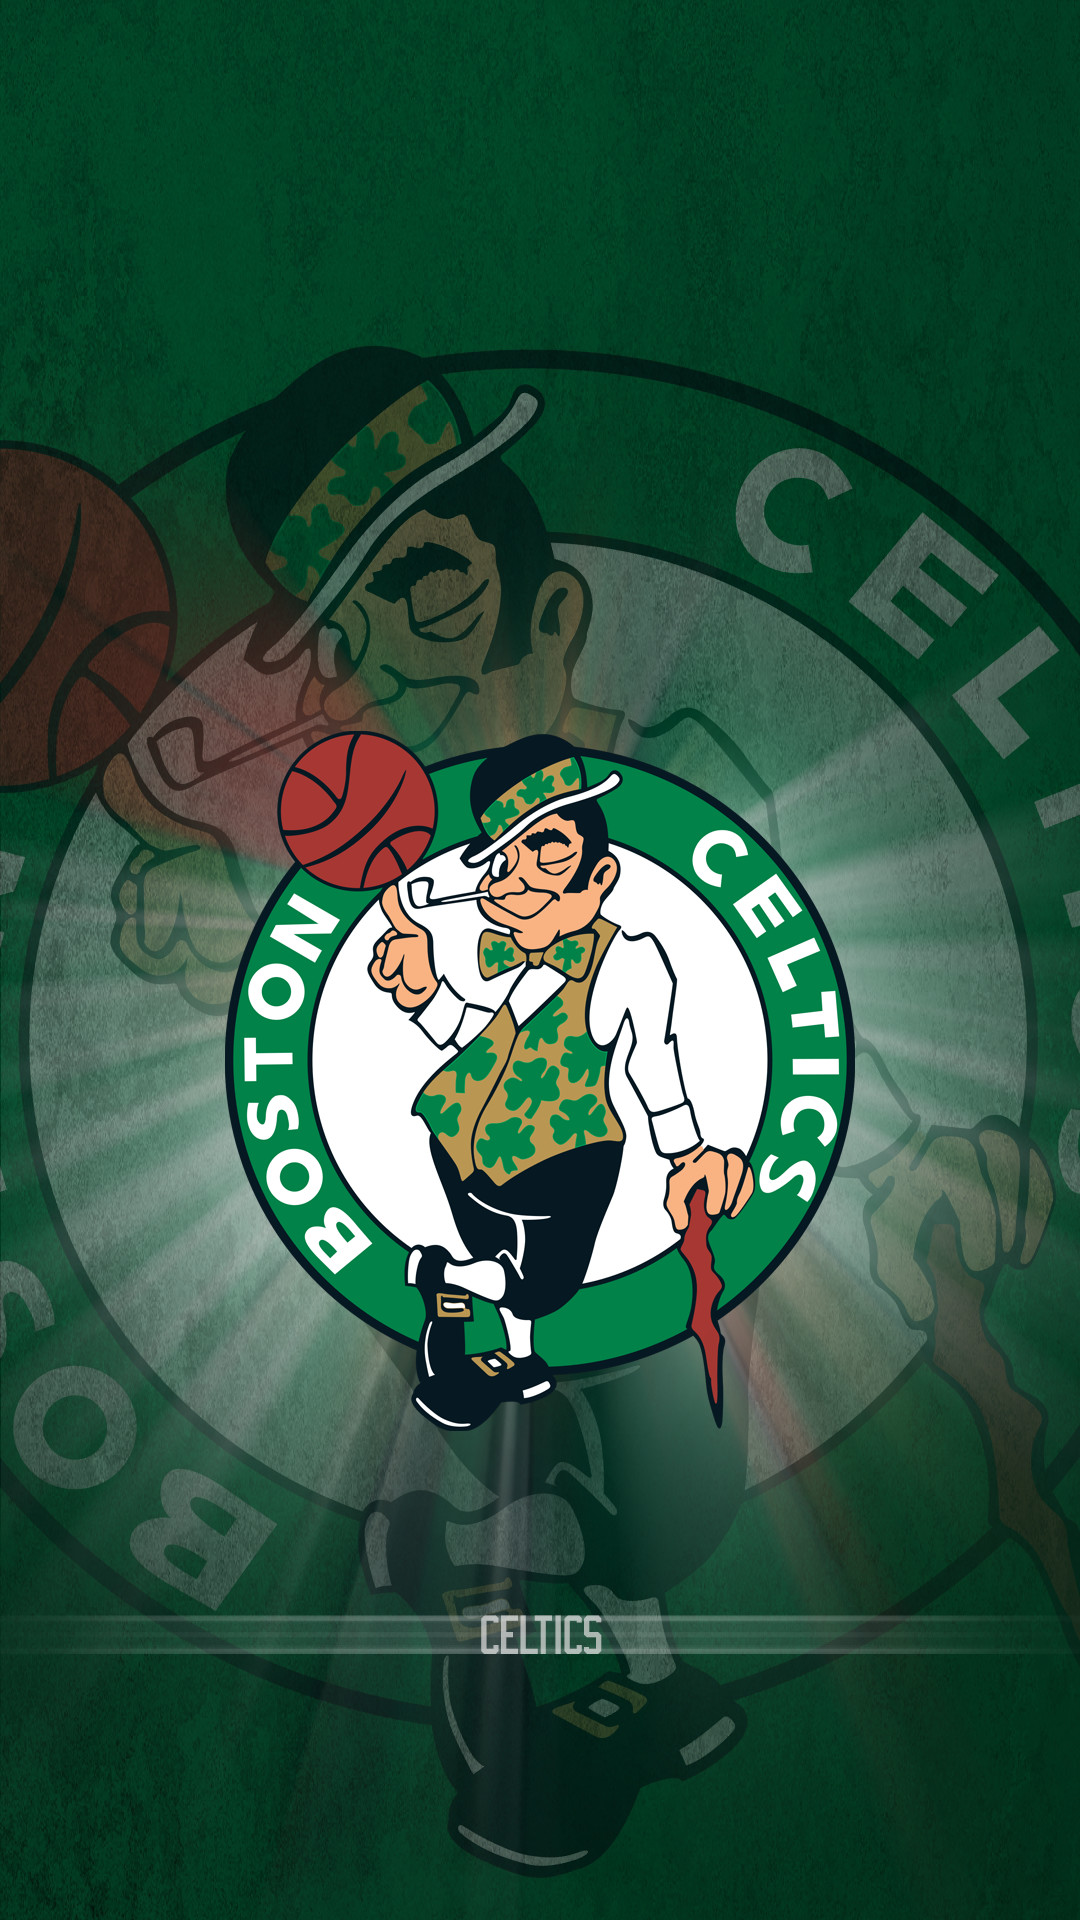 1080x1920 Search Results for “boston celtics iphone 6 wallpaper” – Adorable Wallpapers